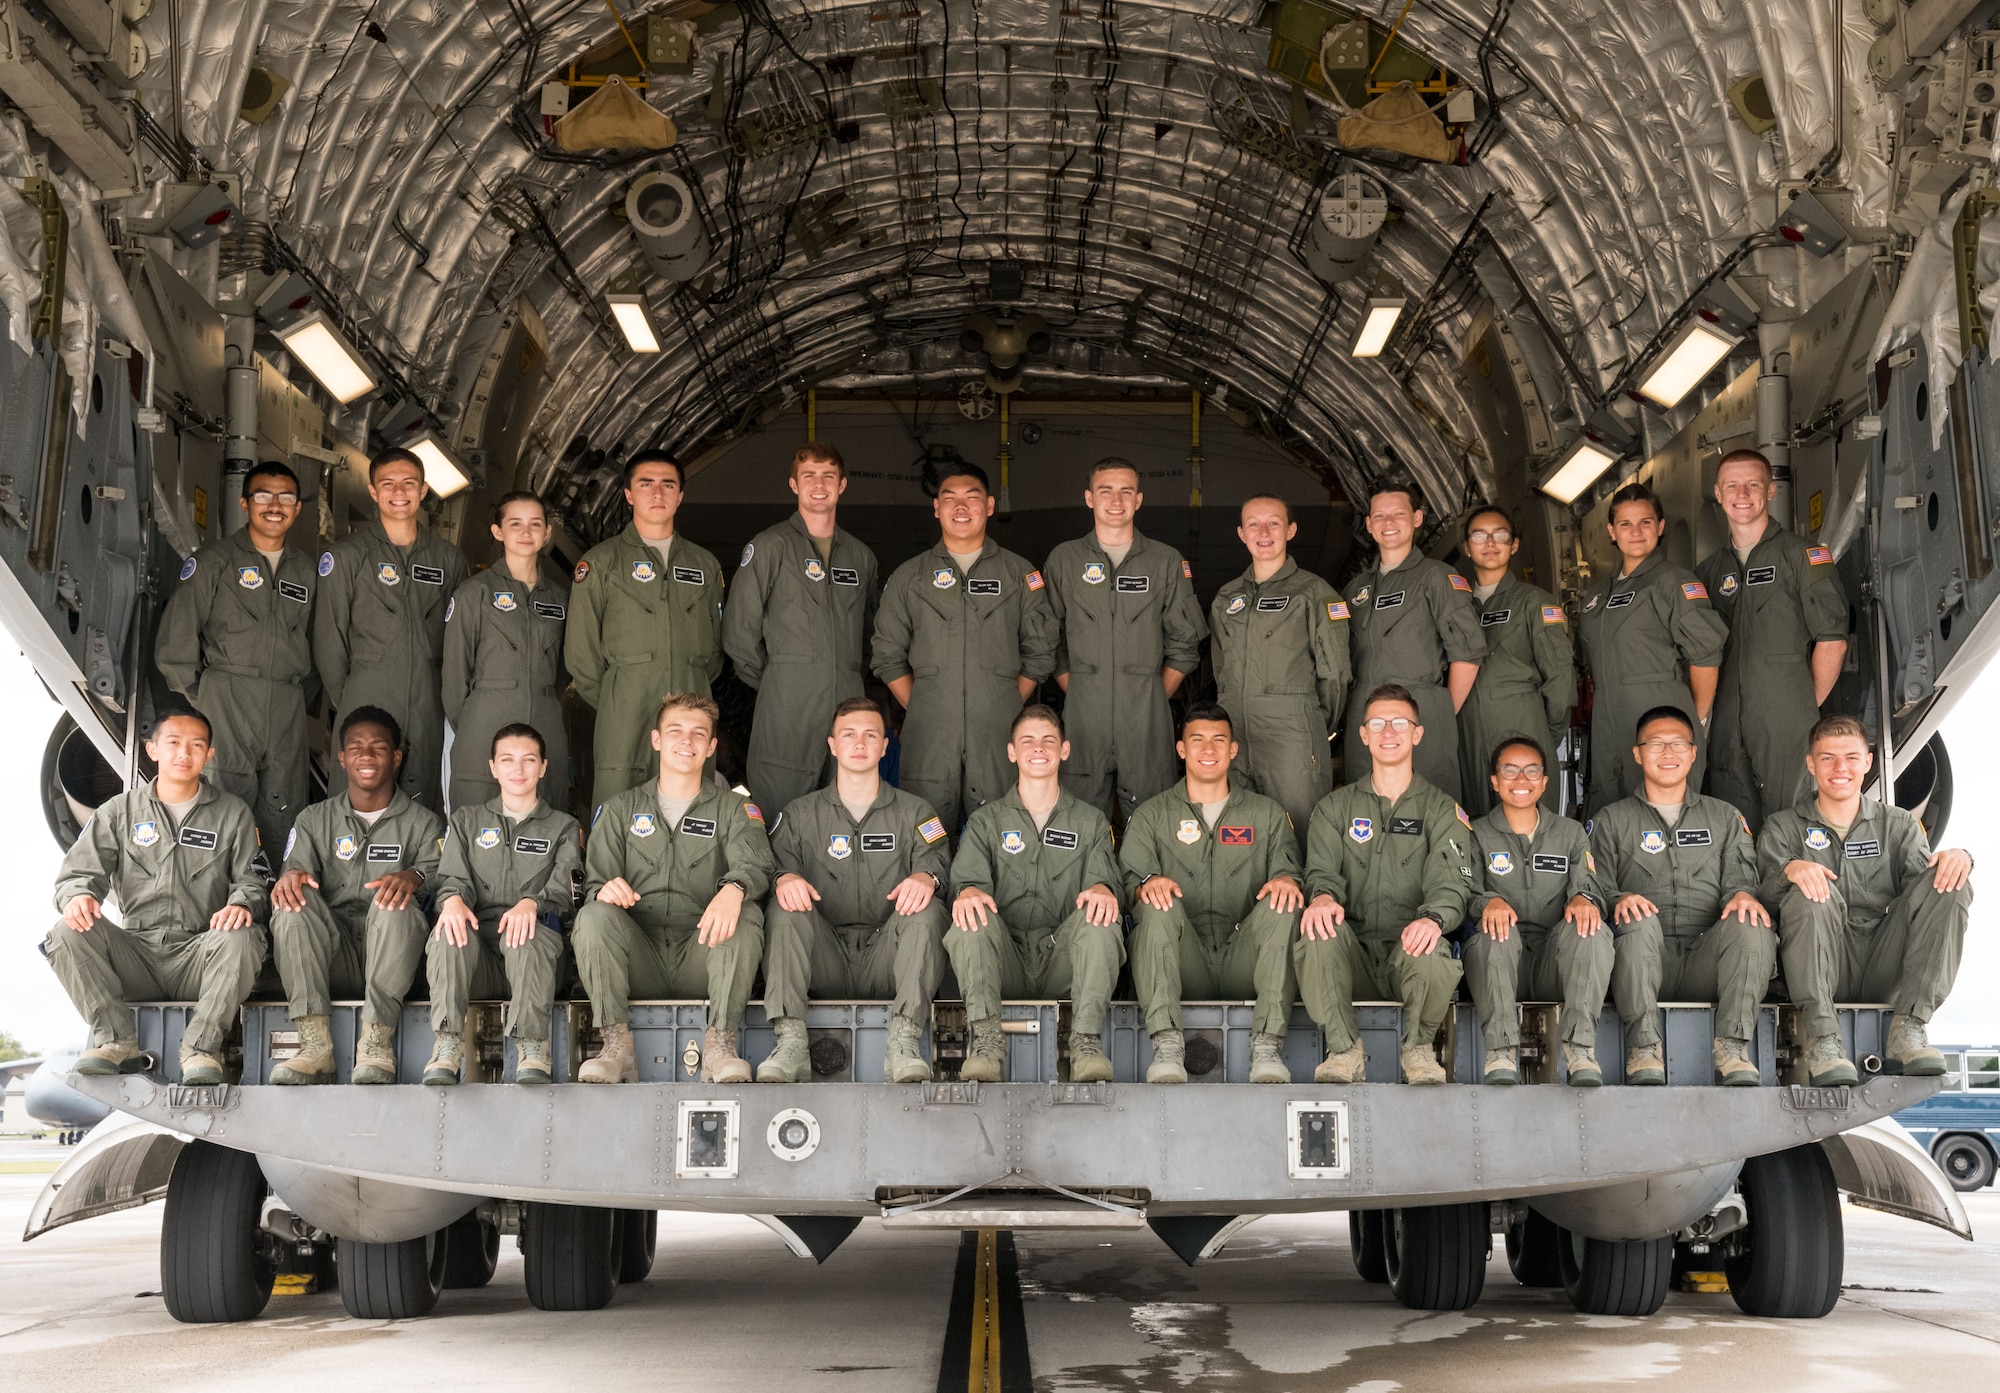 Air Force Junior Reserve Officers’ Training Corps cadets pose for a photo on the cargo ramp of a C-17A Globemaster III July 23, 2019, at Dover Air Force Base, Del. Cadets who attended the eight-week AFJROTC Summer Flight Academy held at Delaware State University in Dover, toured aviation-related facilities and aircraft. (U.S. Air Force photo by Roland Balik)